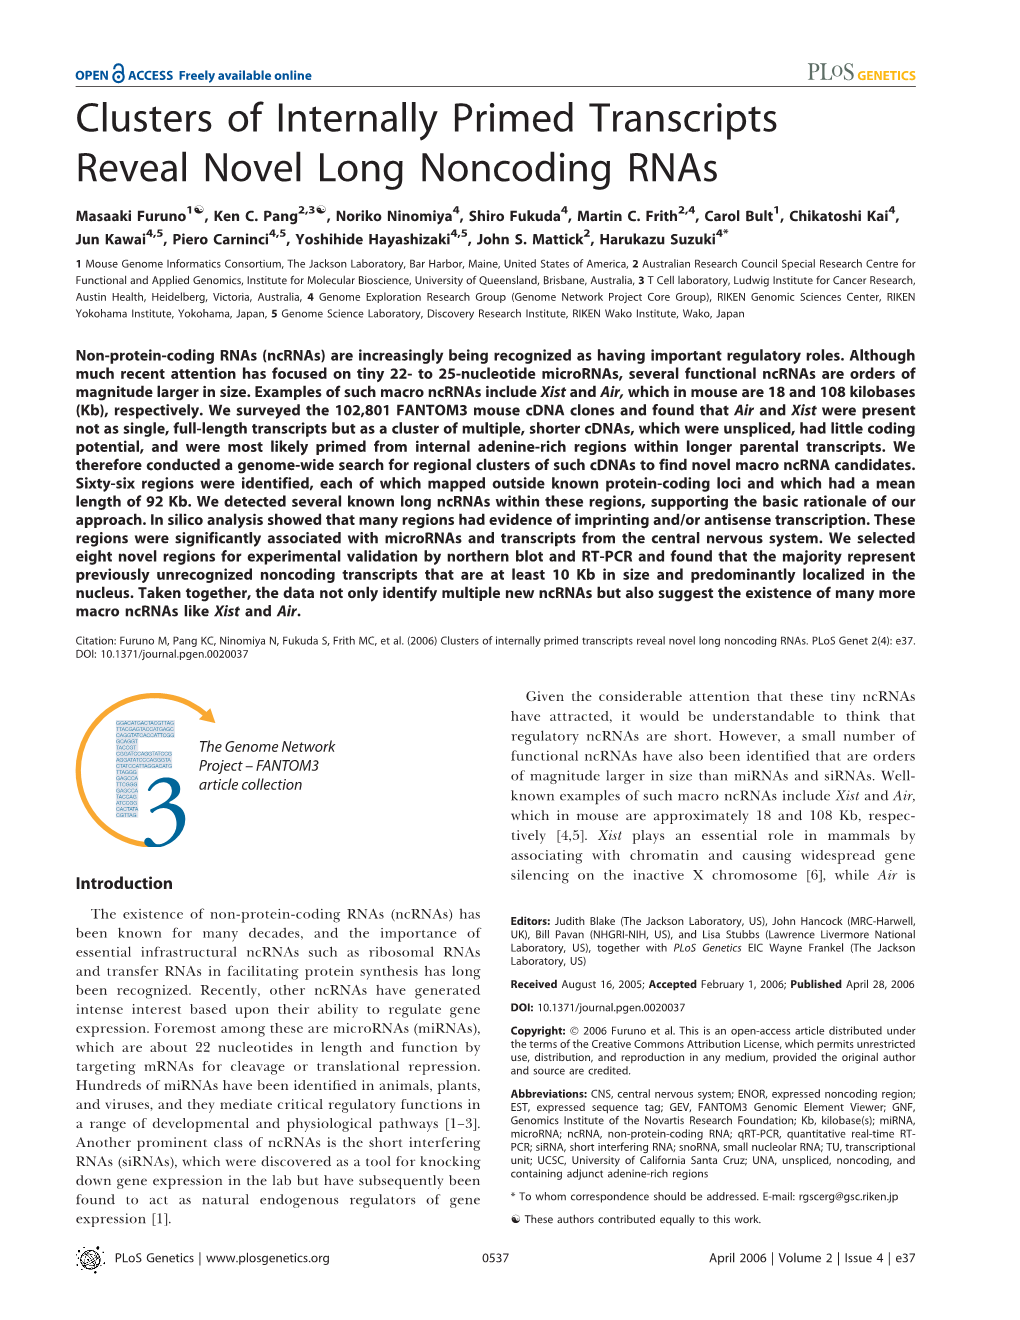 Clusters of Internally Primed Transcripts Reveal Novel Long Noncoding Rnas